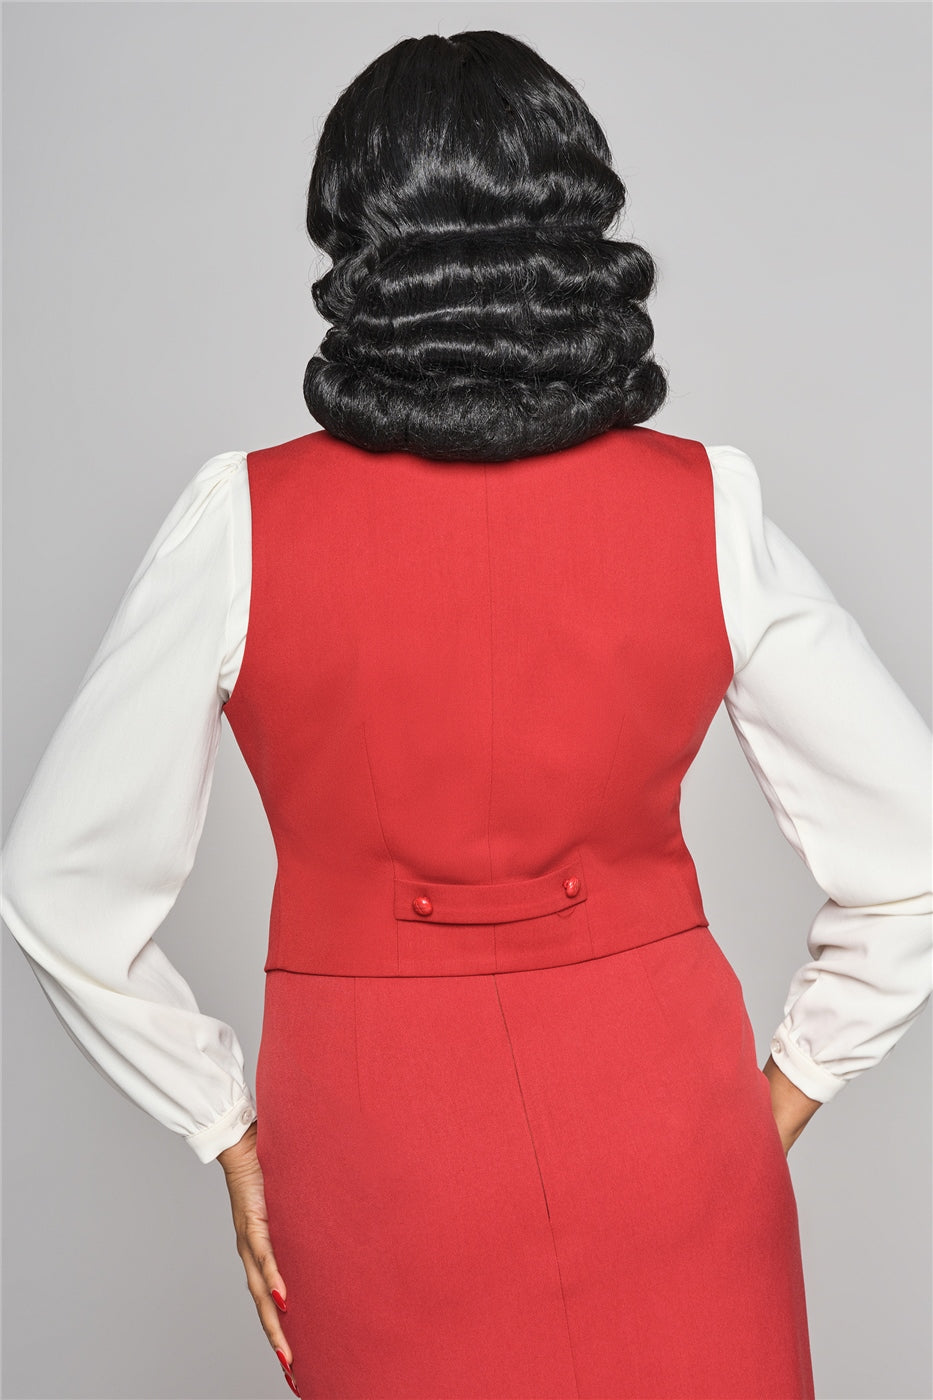 The back of the Professor waist coat by Collectif worn by a lady standing with her hands on her hips